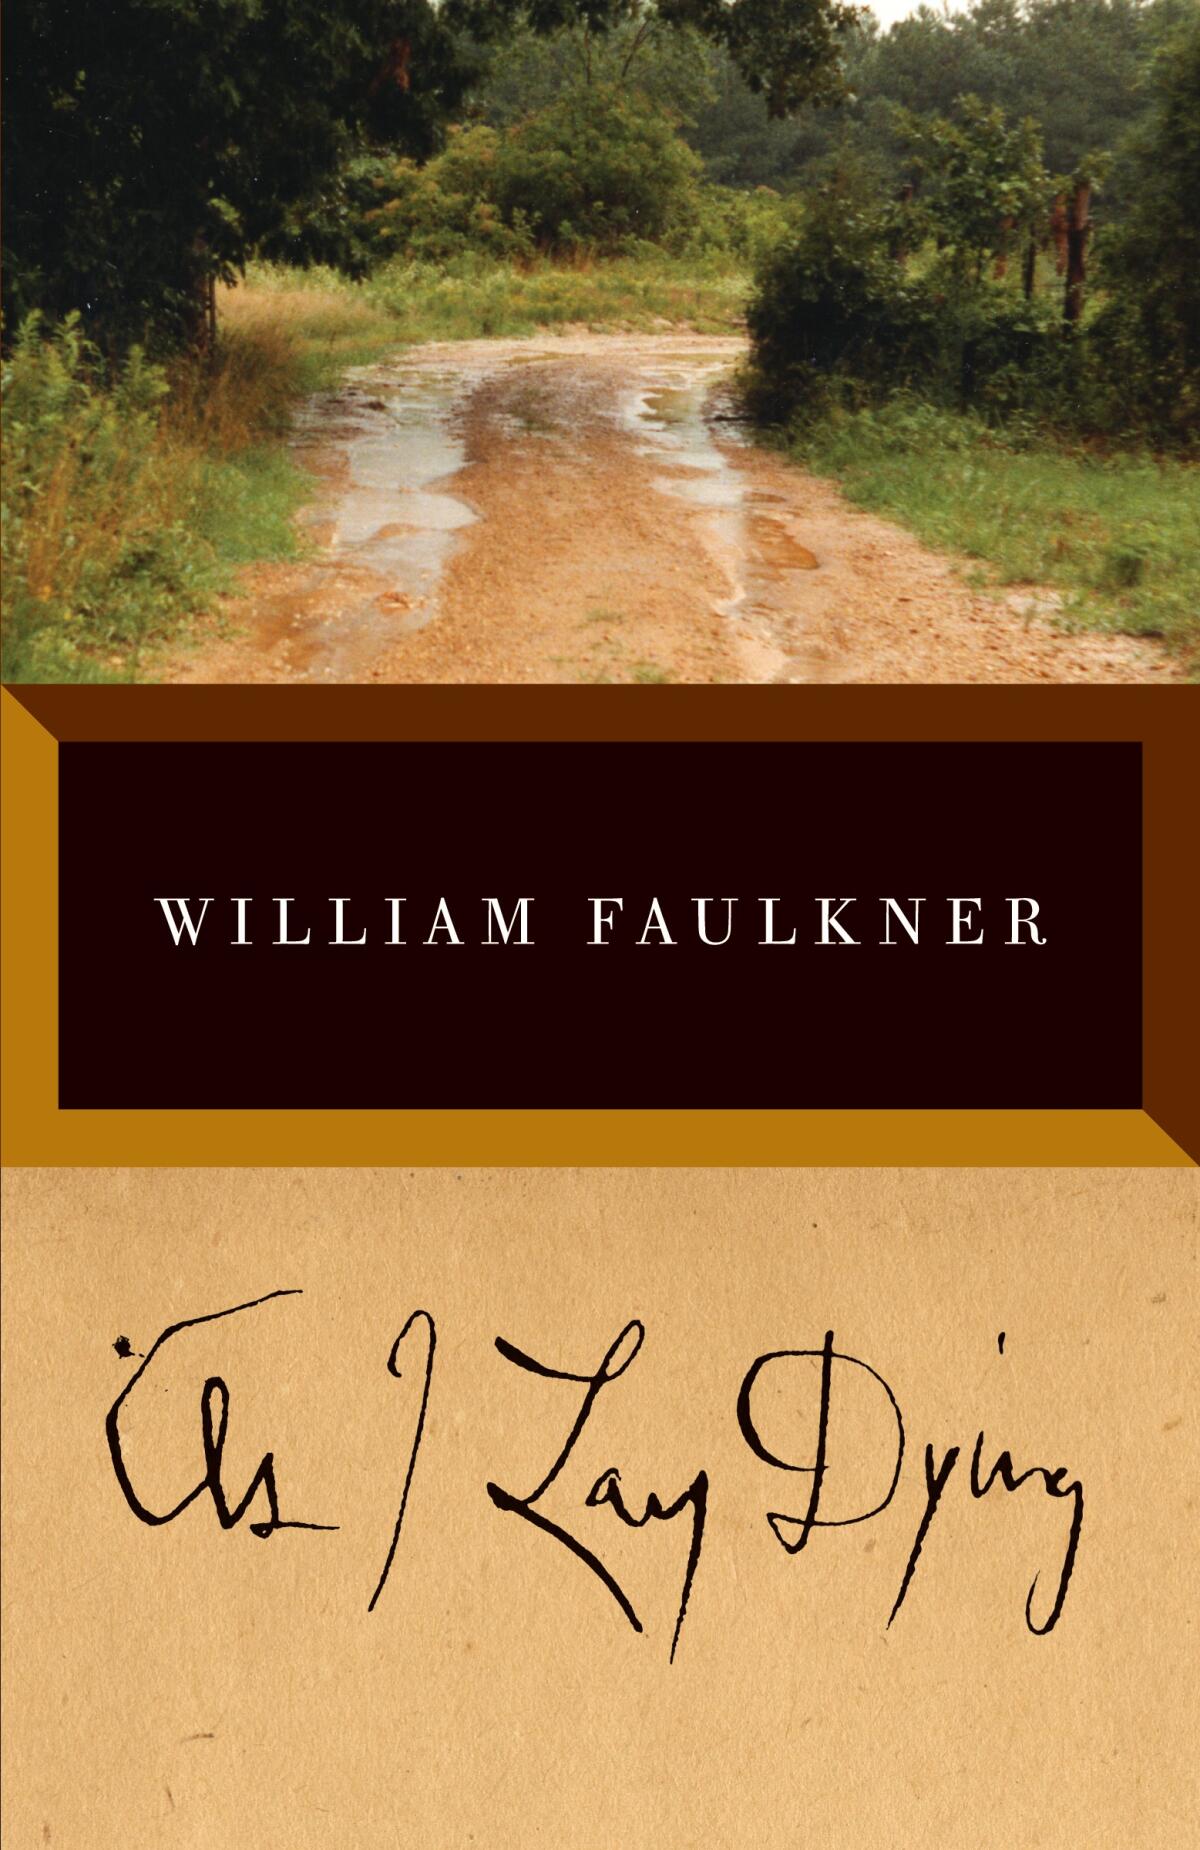 "As I Lay Dying," by William Faulkner.